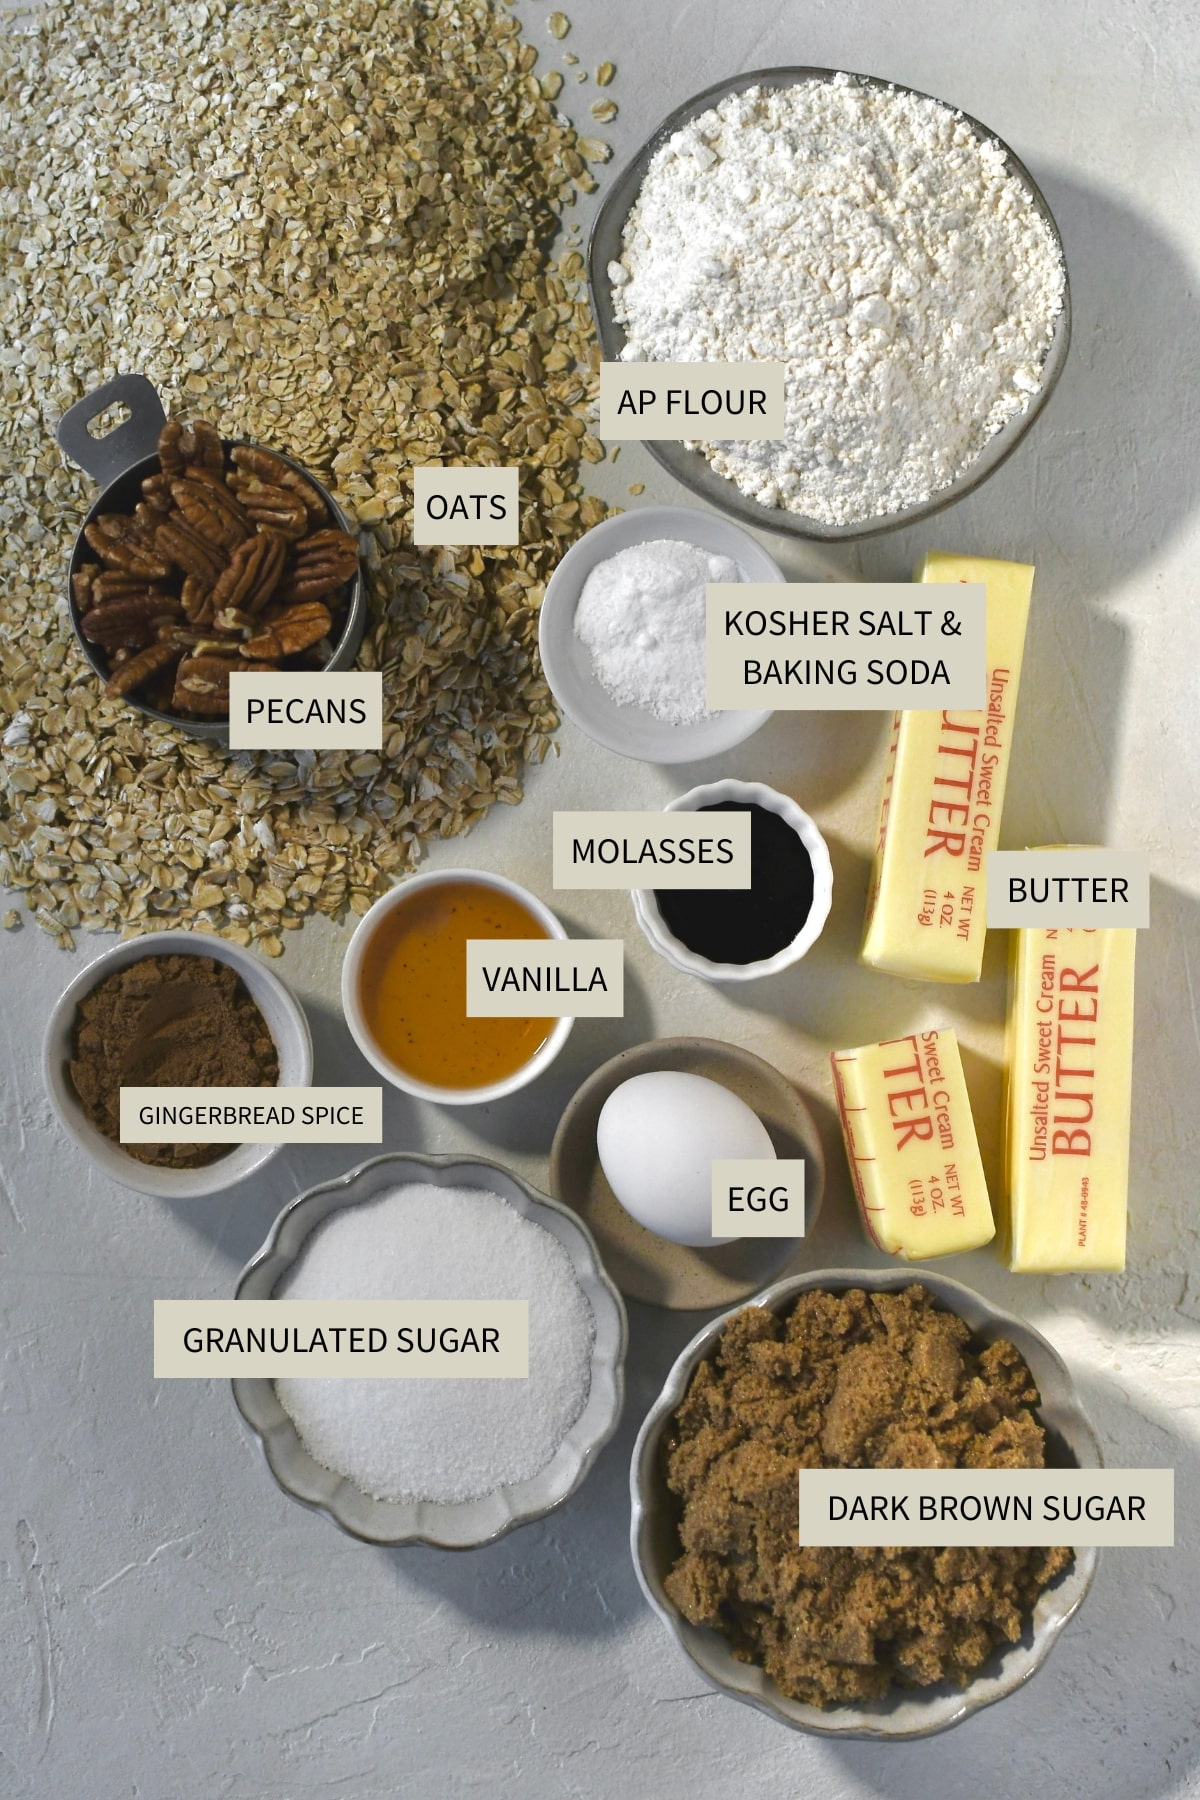 Ingredients needed to make Gingerbread Oatmeal Cream Pies.